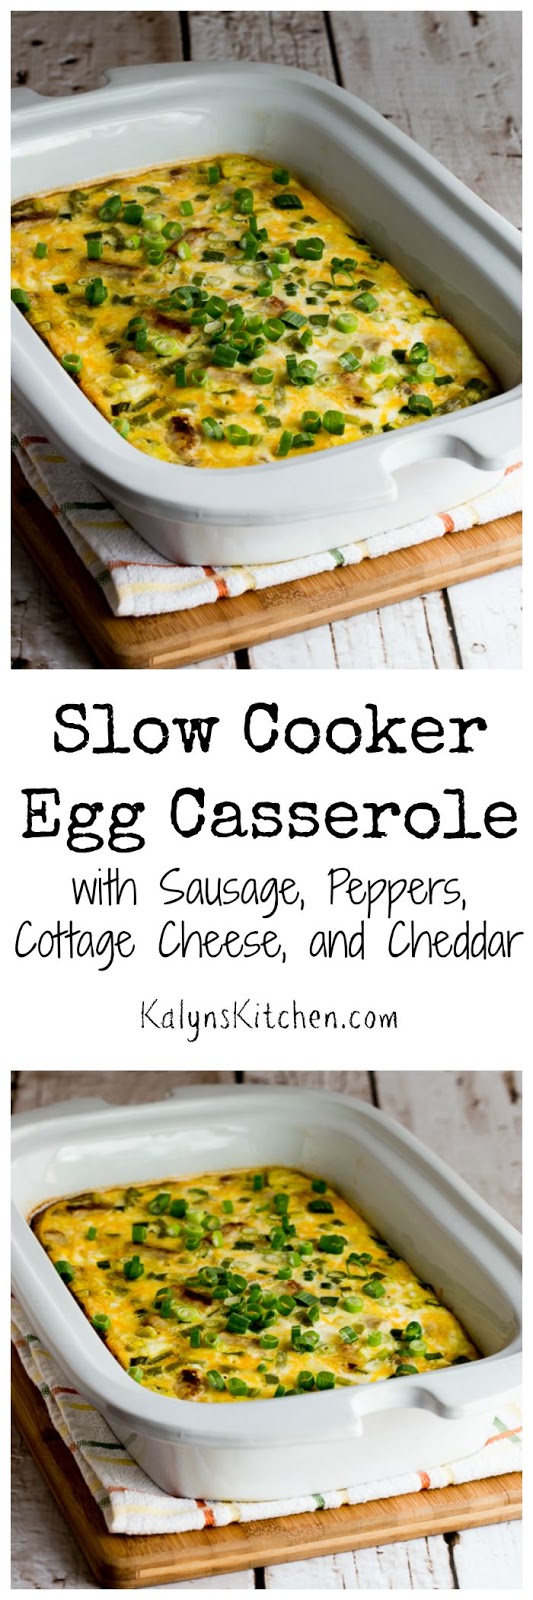 Kalyn's Kitchen®: Slow Cooker Egg Casserole with Sausage, Peppers ...